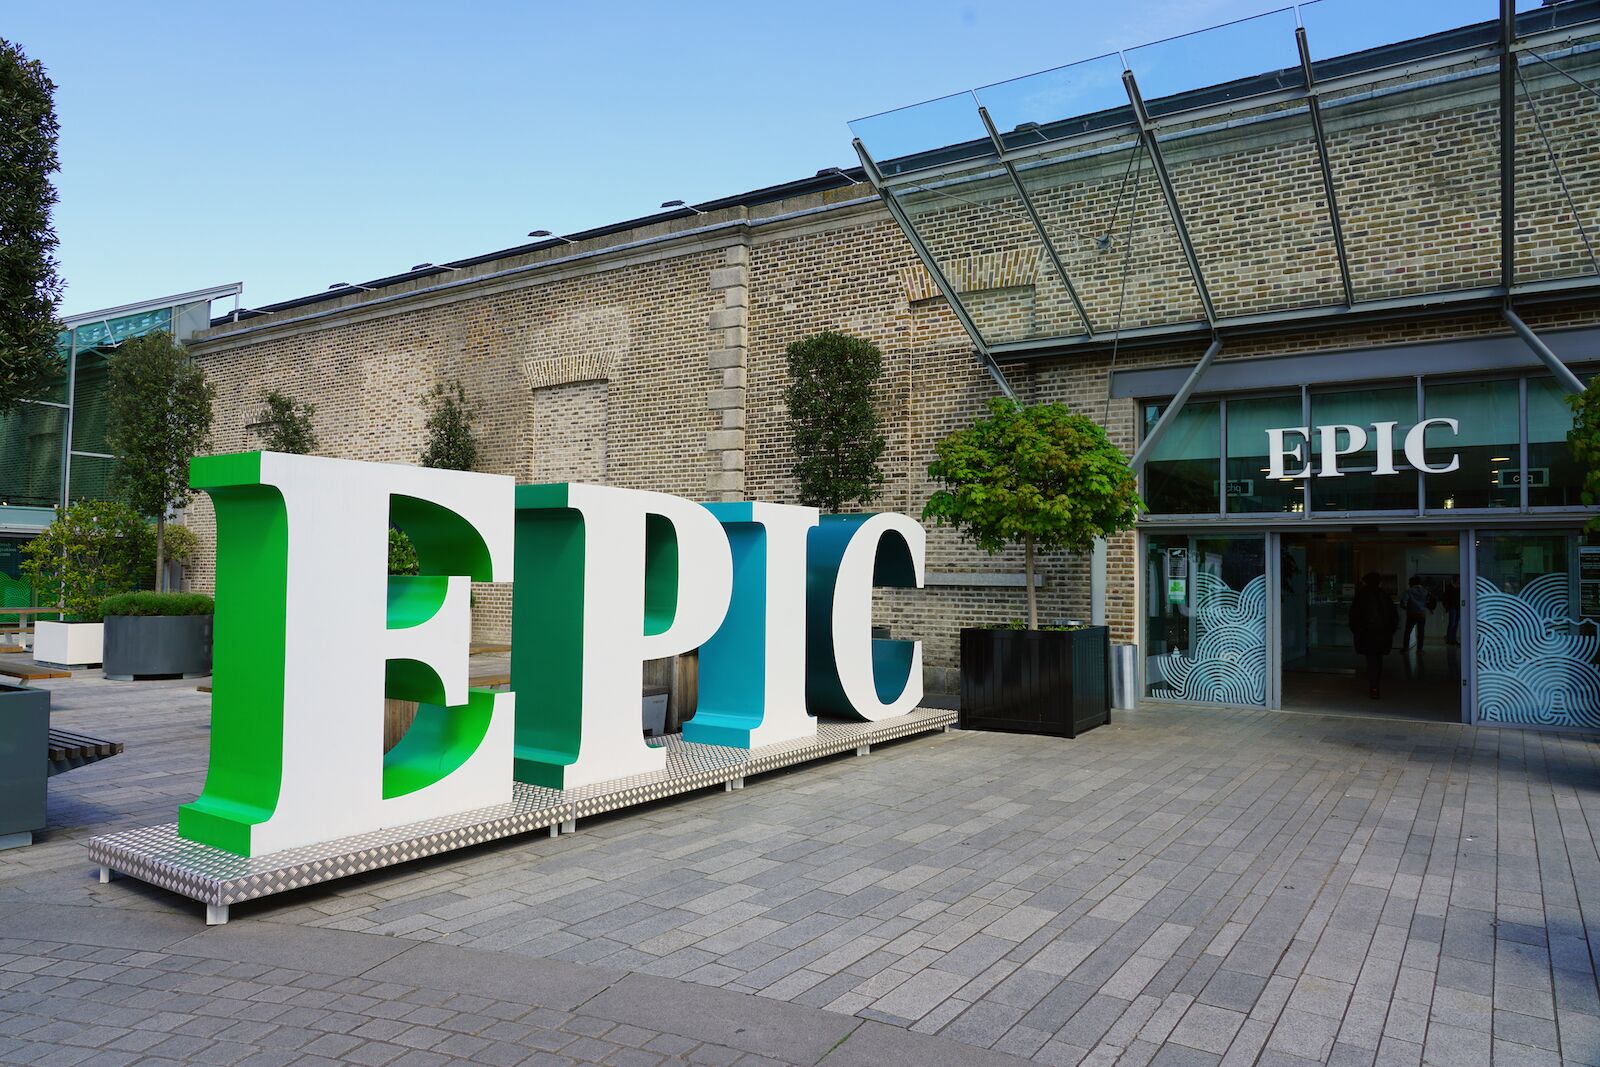 Museums in Dublin: View of EPIC The Irish Emigration Museum, an interactive museum about the history of the Irish diaspora located in the Docklands in Dublin.